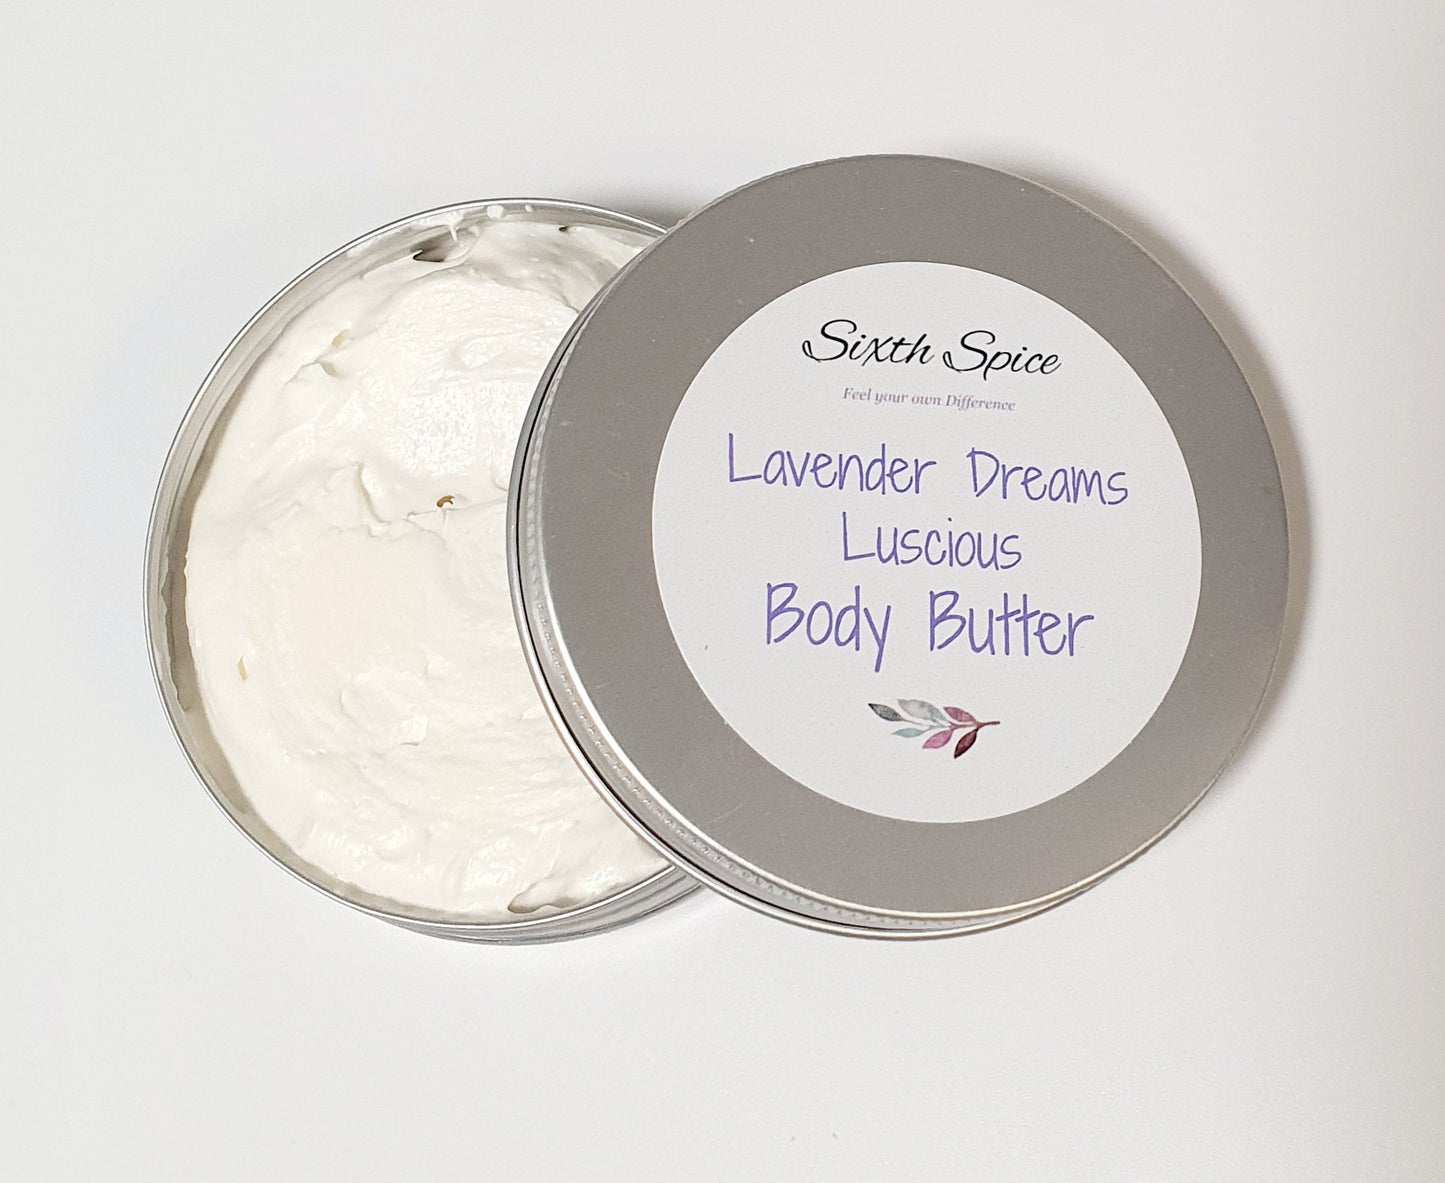 Lavender Dreams scented whipped shea body butter